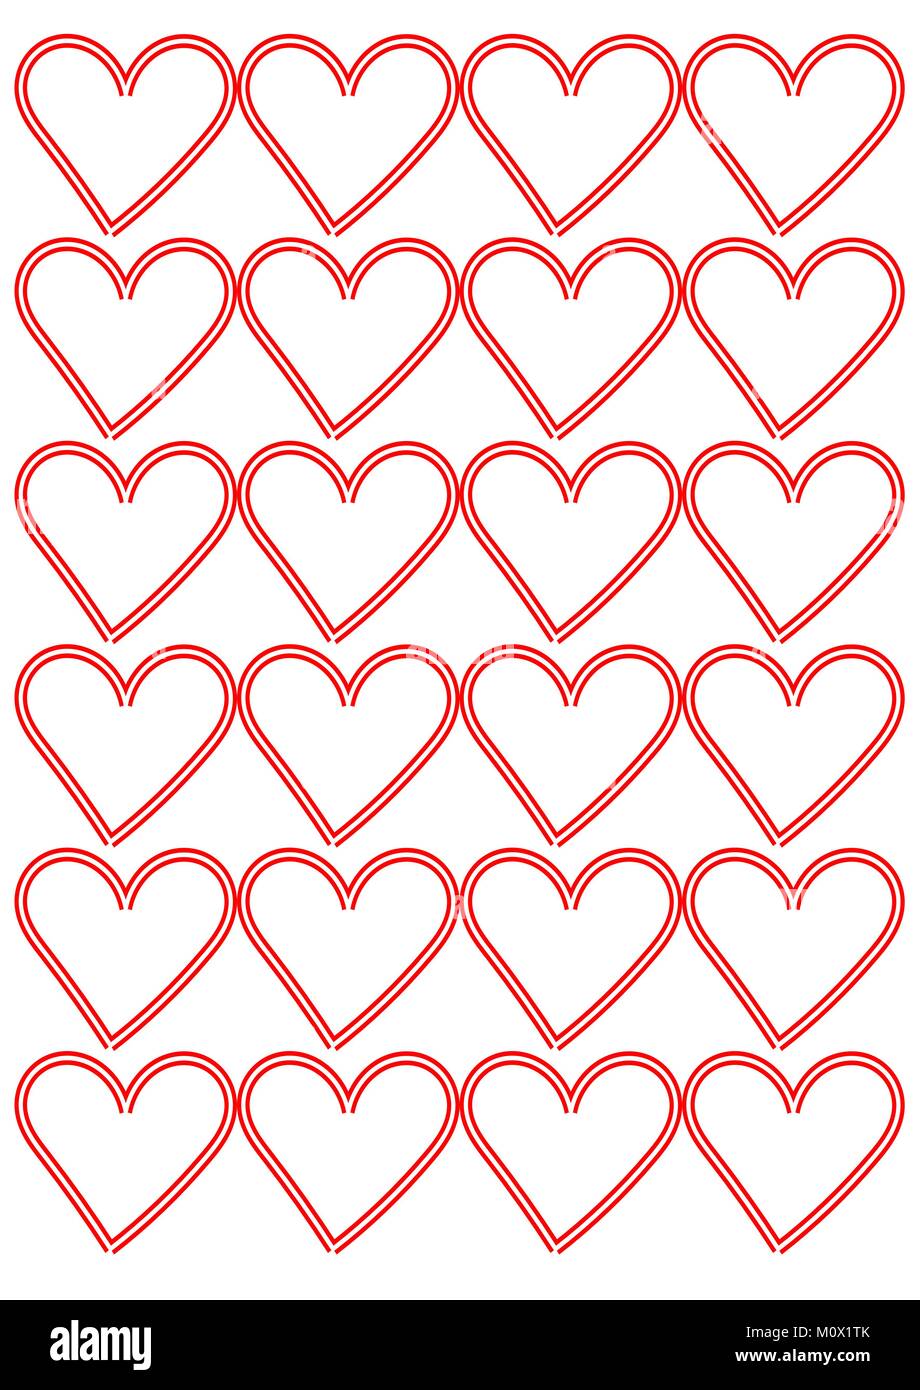 Repeated Heart Pattern On Plain White Background Stock Vector